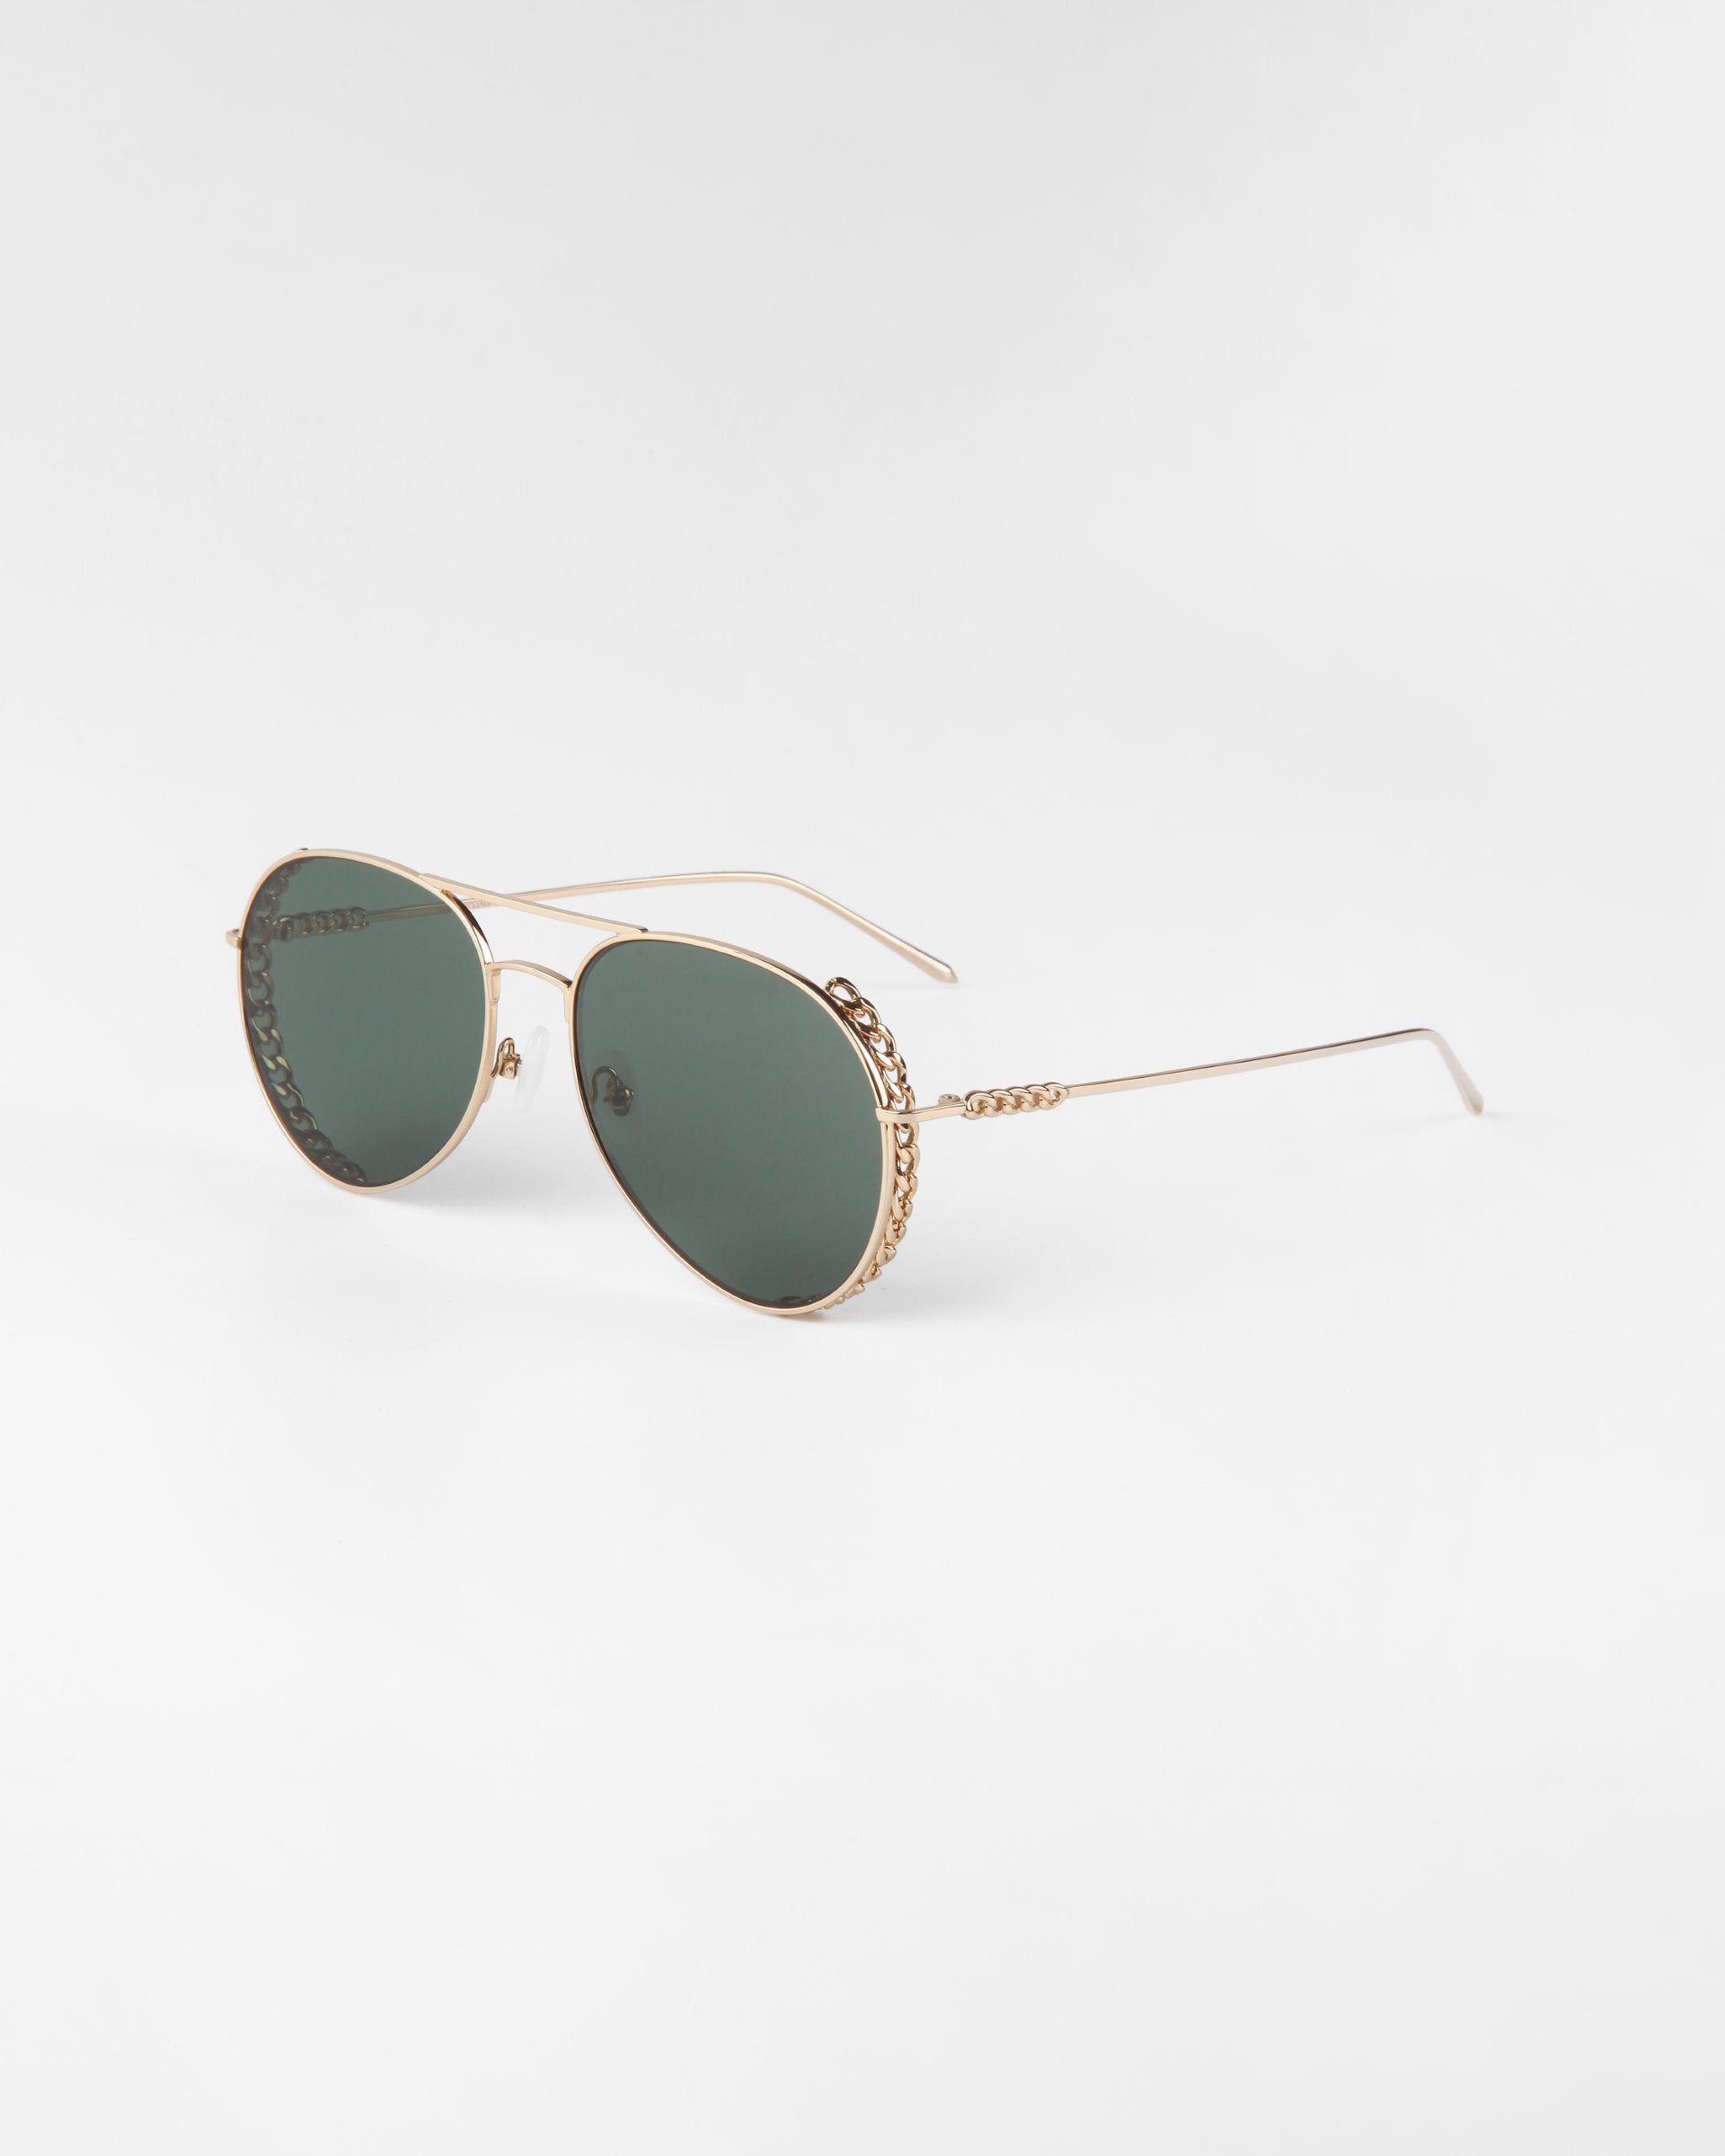 A pair of stylish Links aviator sunglasses by For Art's Sake® with thin gold-plated stainless steel frames and green nylon lenses. The gold temples feature a subtle chain detail near the hinges, adding a touch of elegance to the classic design. The Links sunglasses are set against a plain, light background.